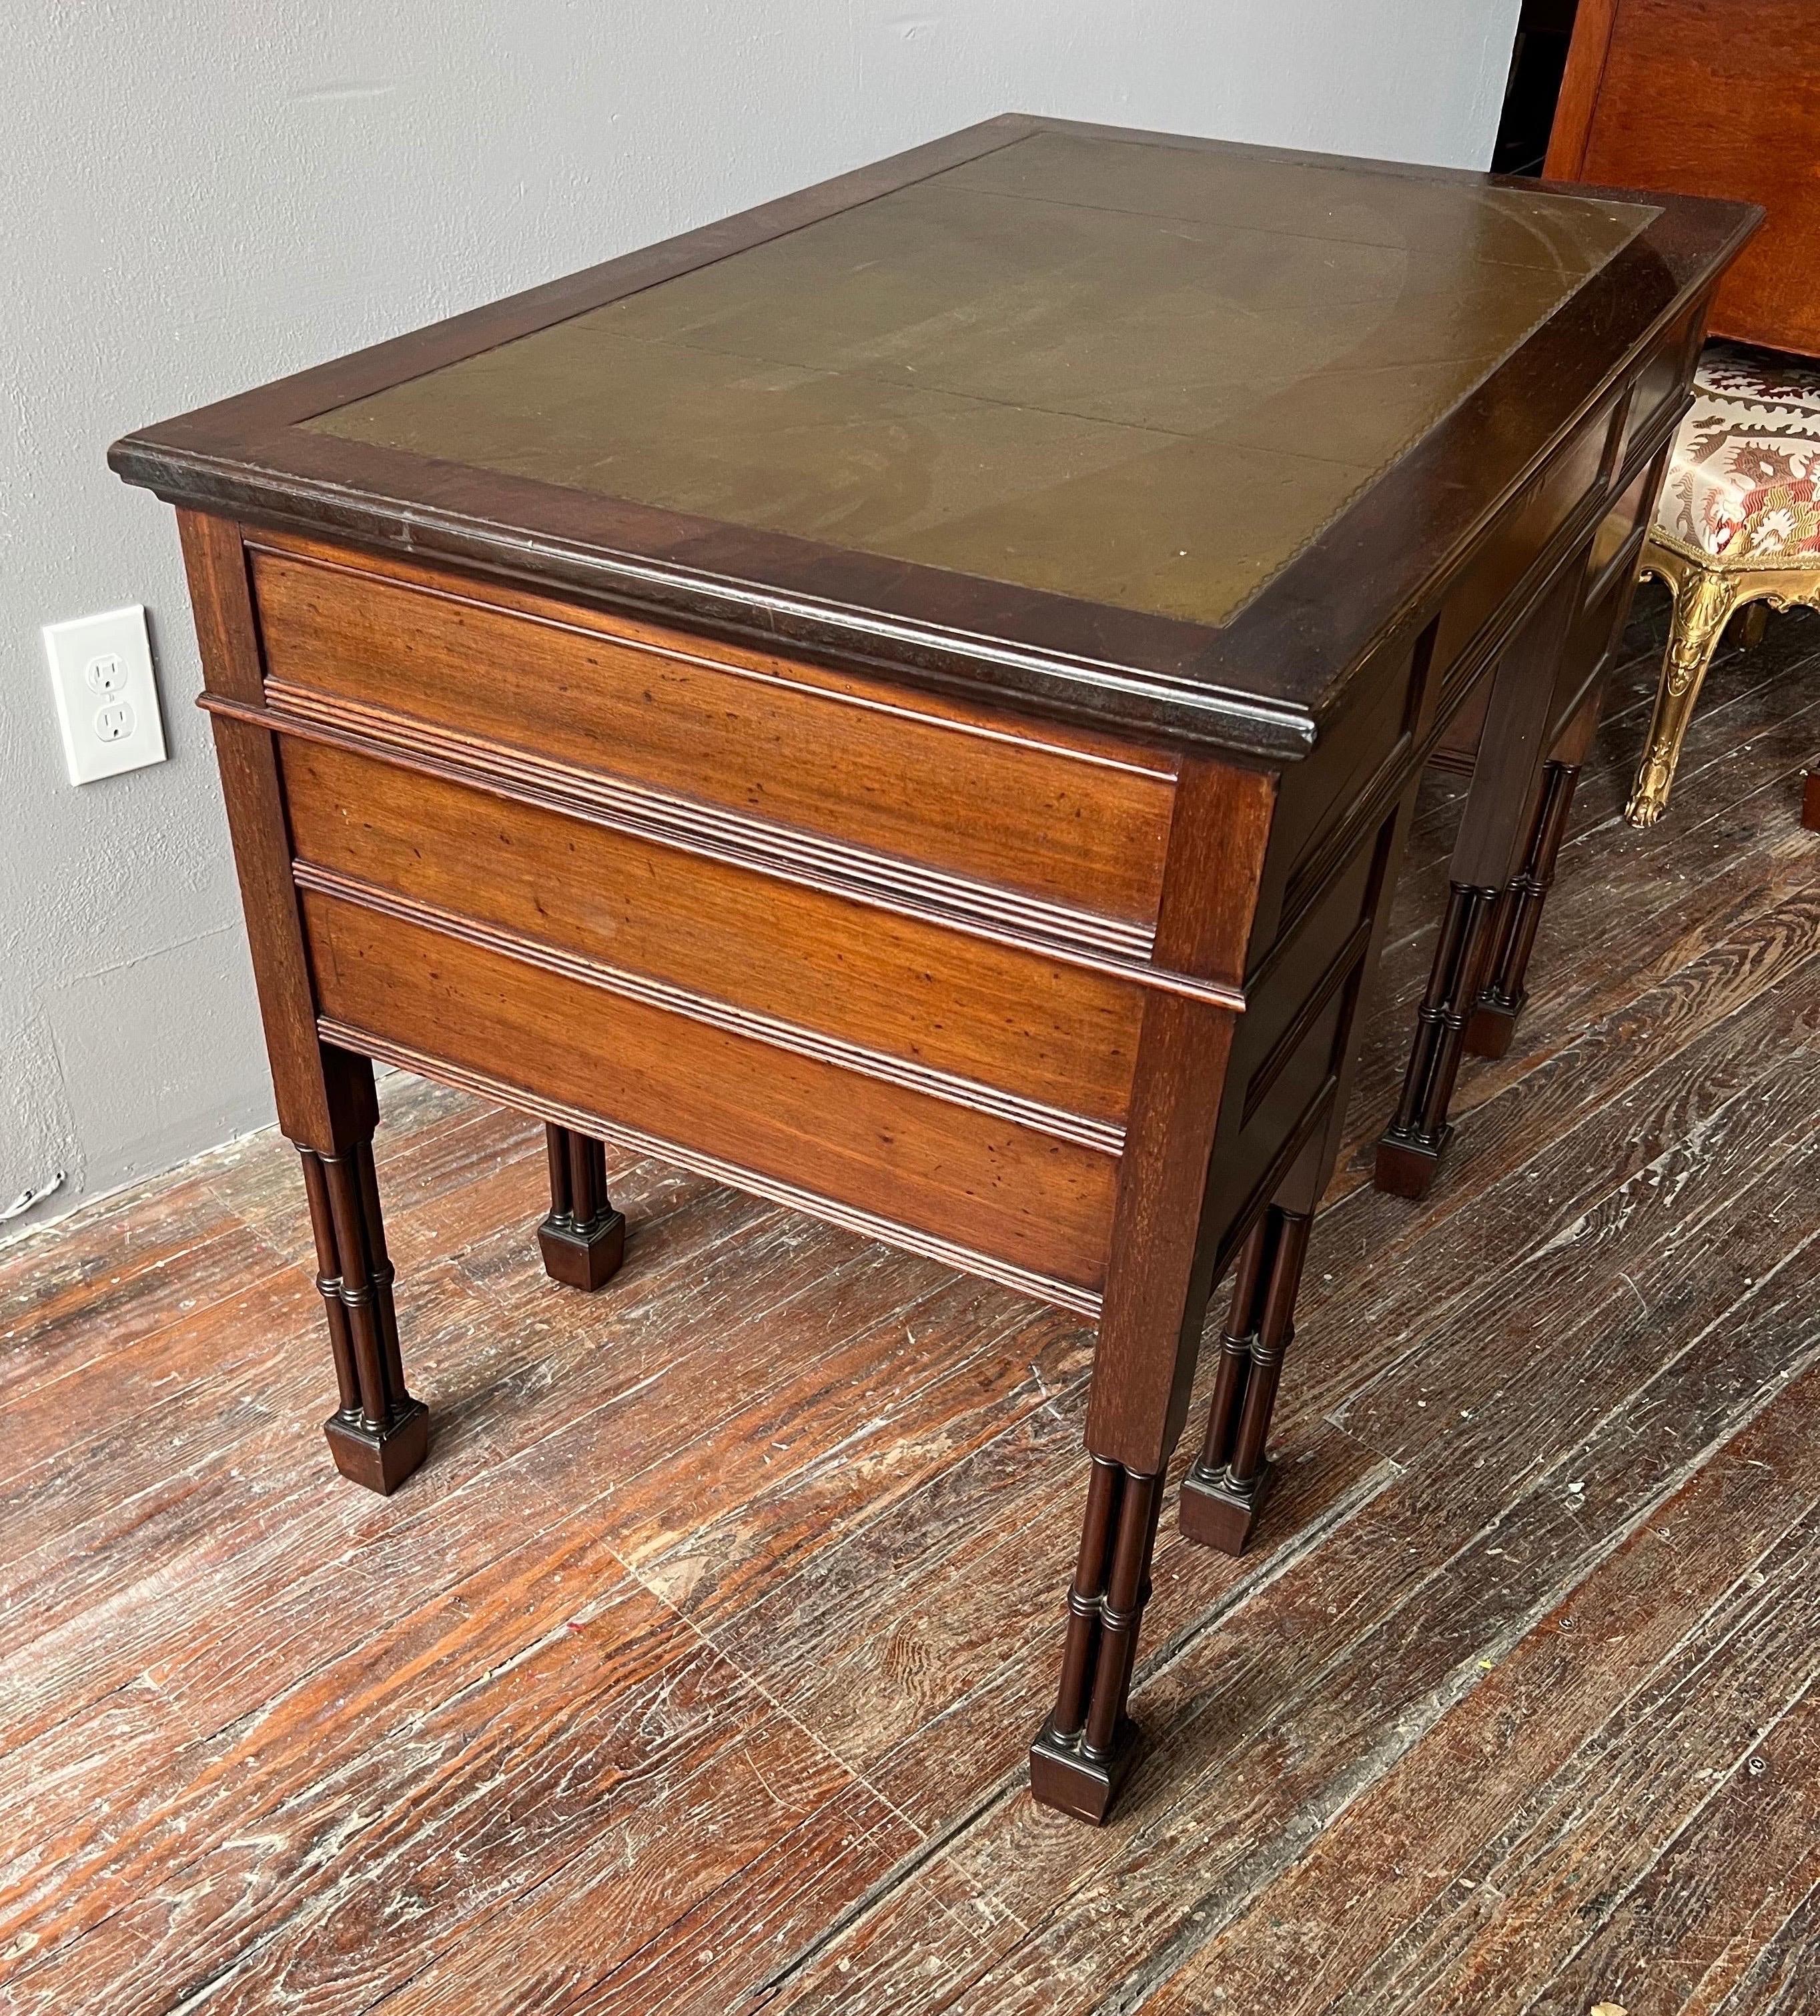 19th Century Edwards and Roberts Leather Top Desk with Faux Bamboo Legs For Sale 1